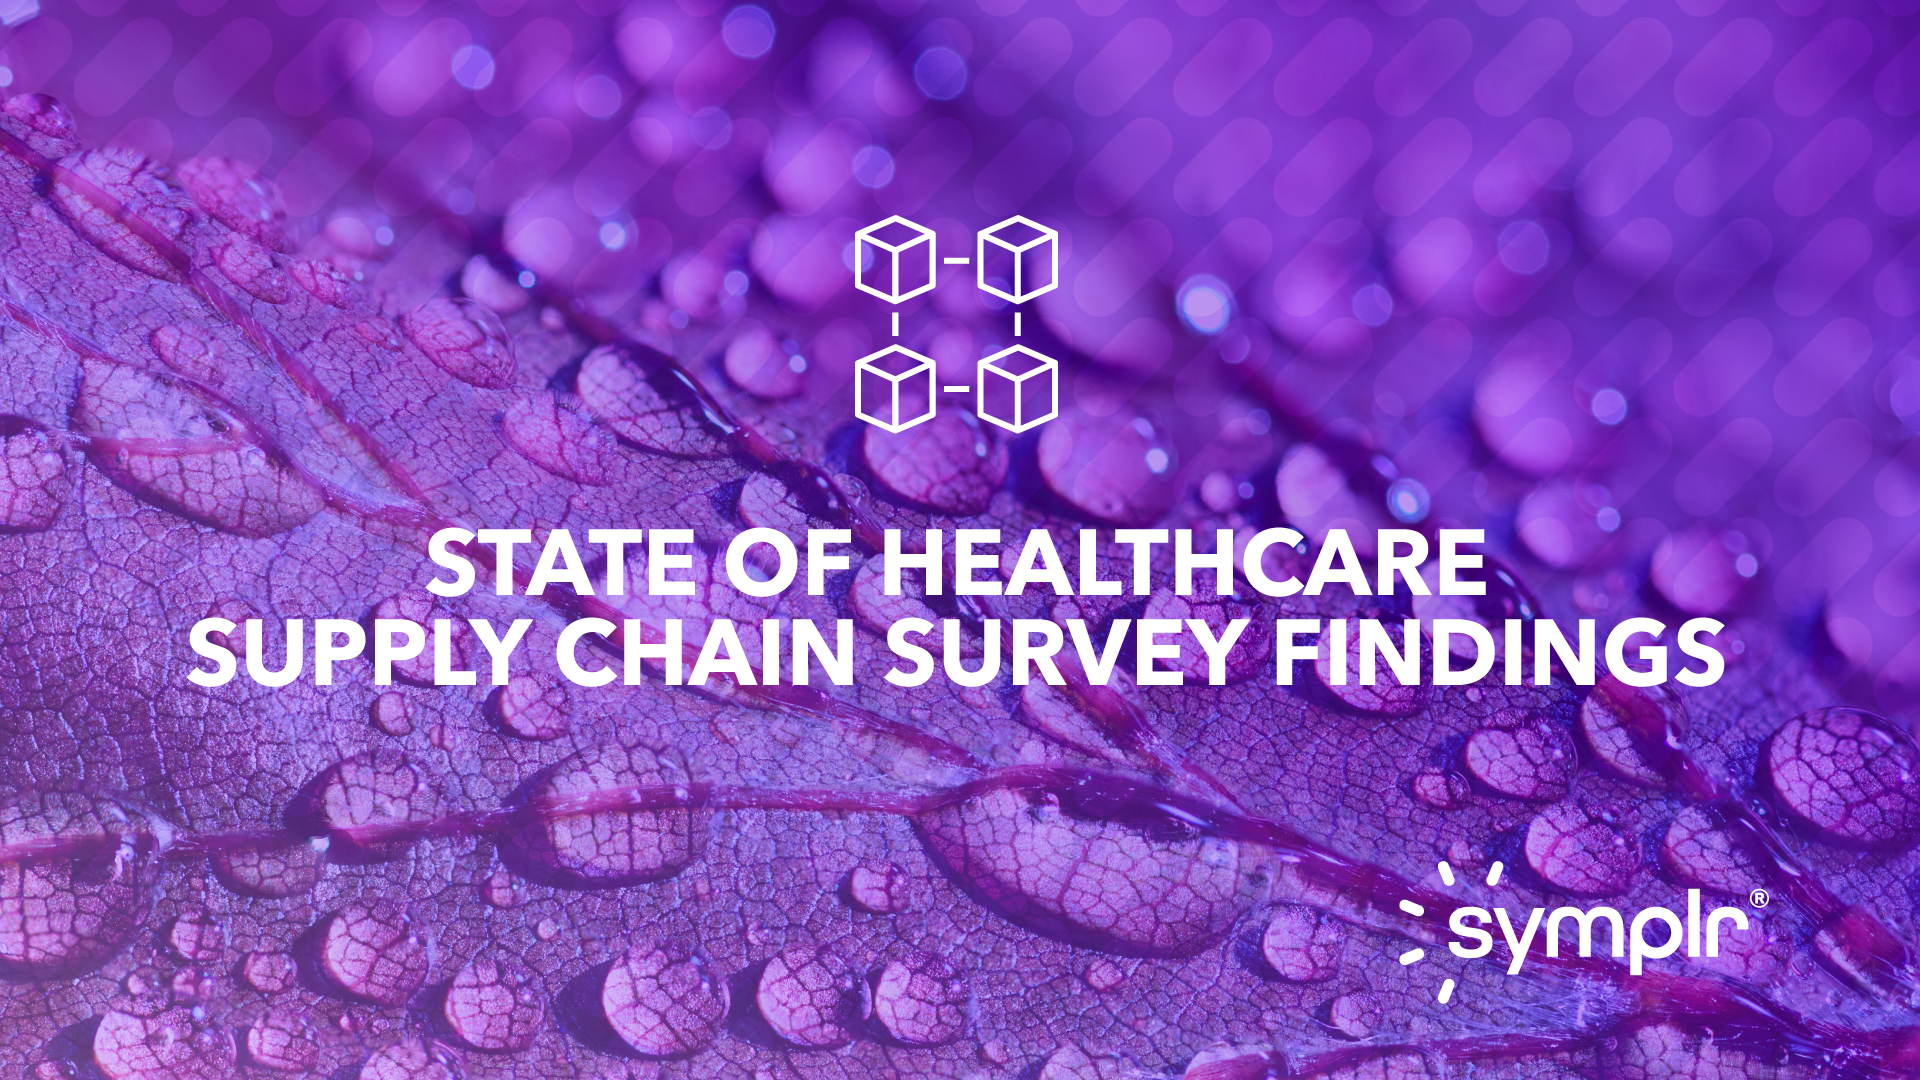 symplr's State of Healthcare Supply Chain Survey Findings